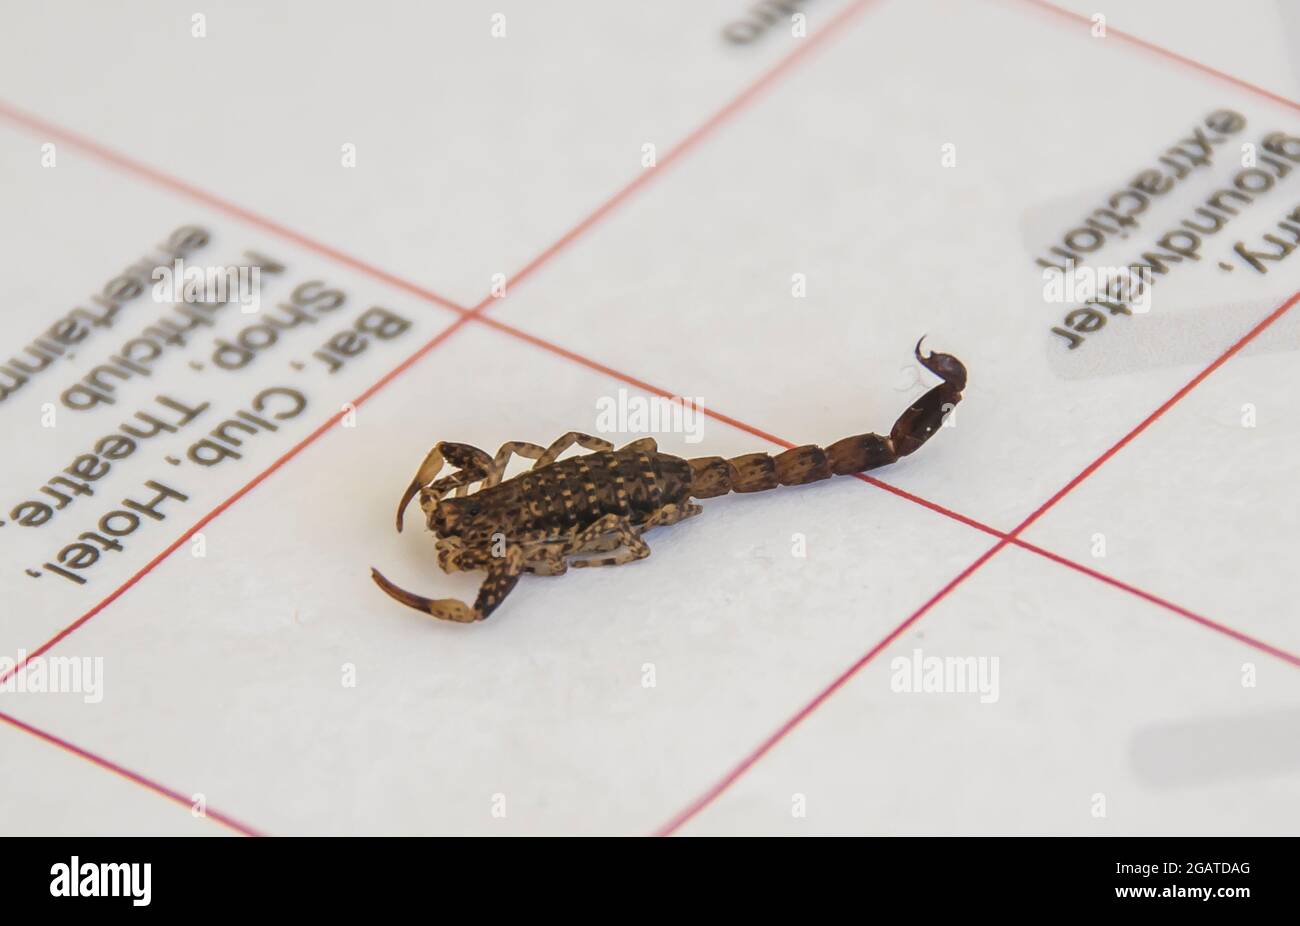 Mildly venemous Marbled scorpion, Lychas marmoreus, resting on planning documents inside house in Queensland, Australia. Spring house guest. Stock Photo